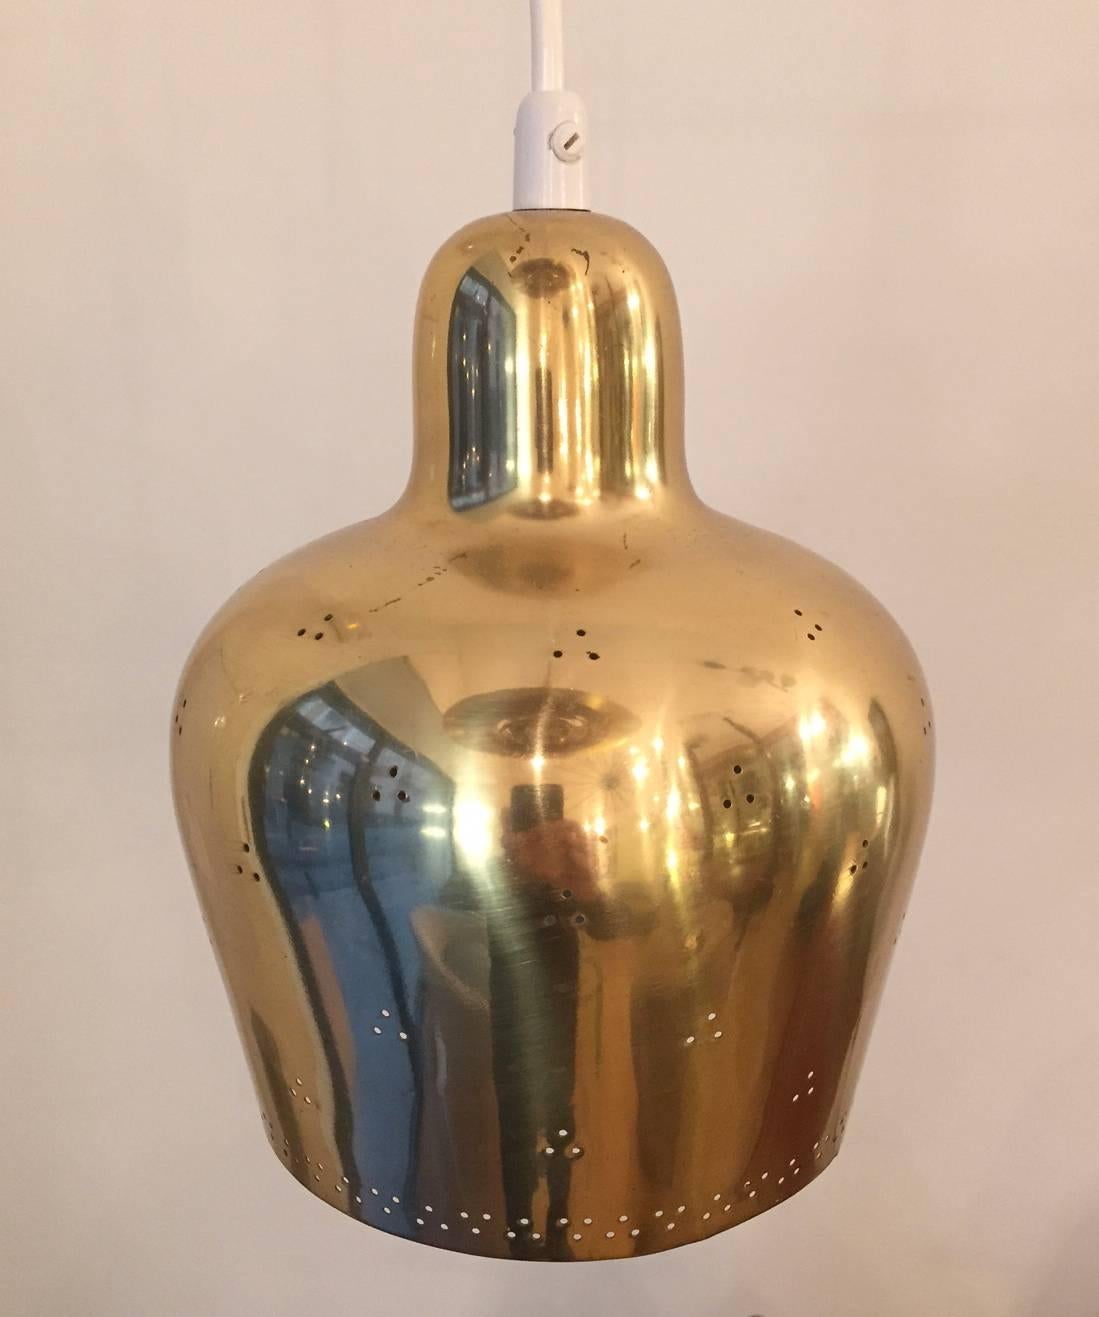 A polished and perforated brass pendant light designed jointly by Paavo Tynell and his pupil Alvar Alto and produced by Taito Oy in the 1940.
Excellent condition. Collection item. 
Shipping cost to anywhere in the world: 85 Euros.